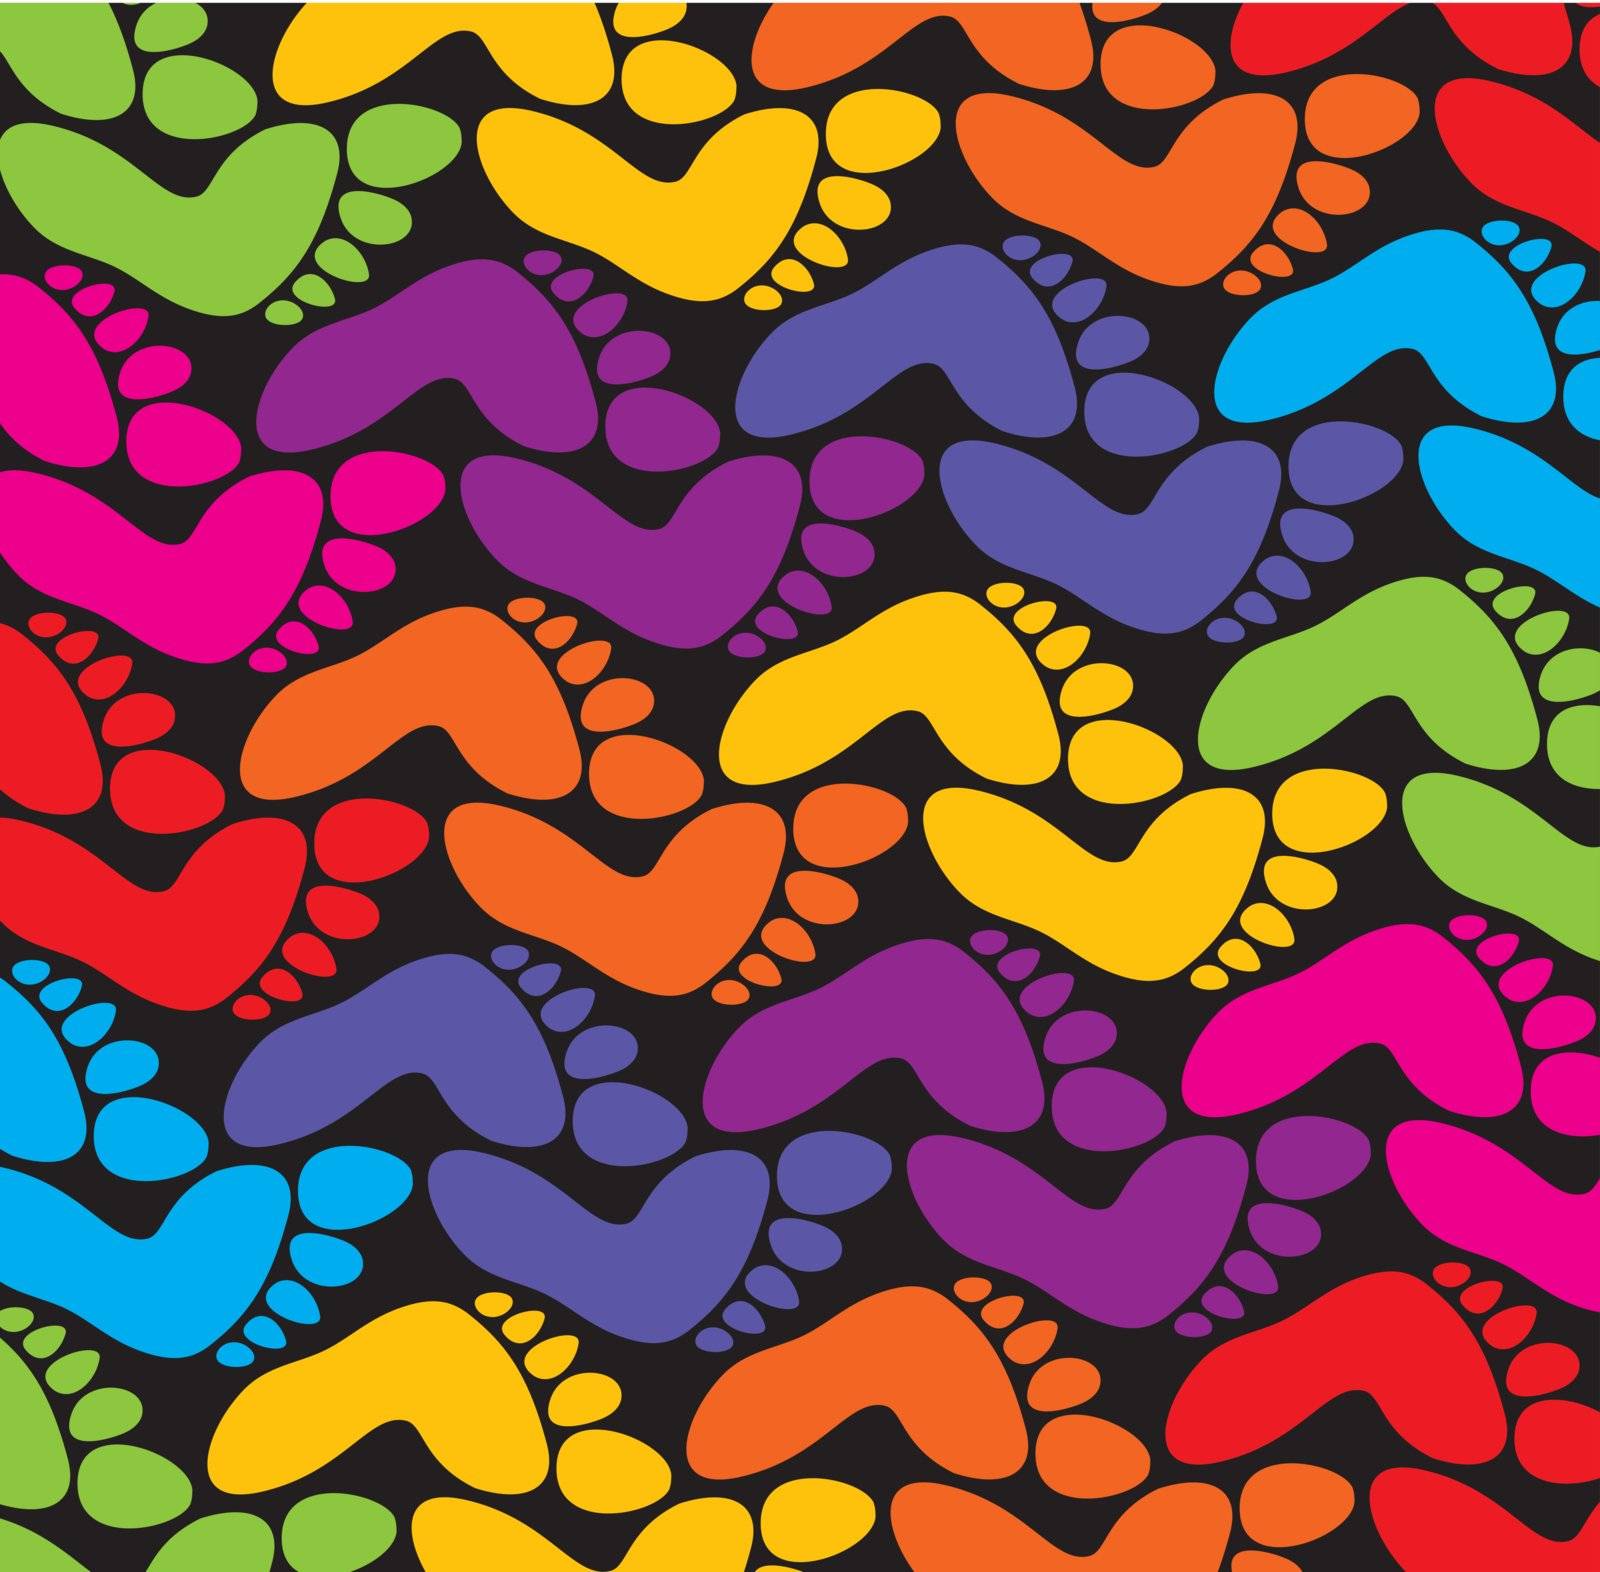 vector colorful feet background